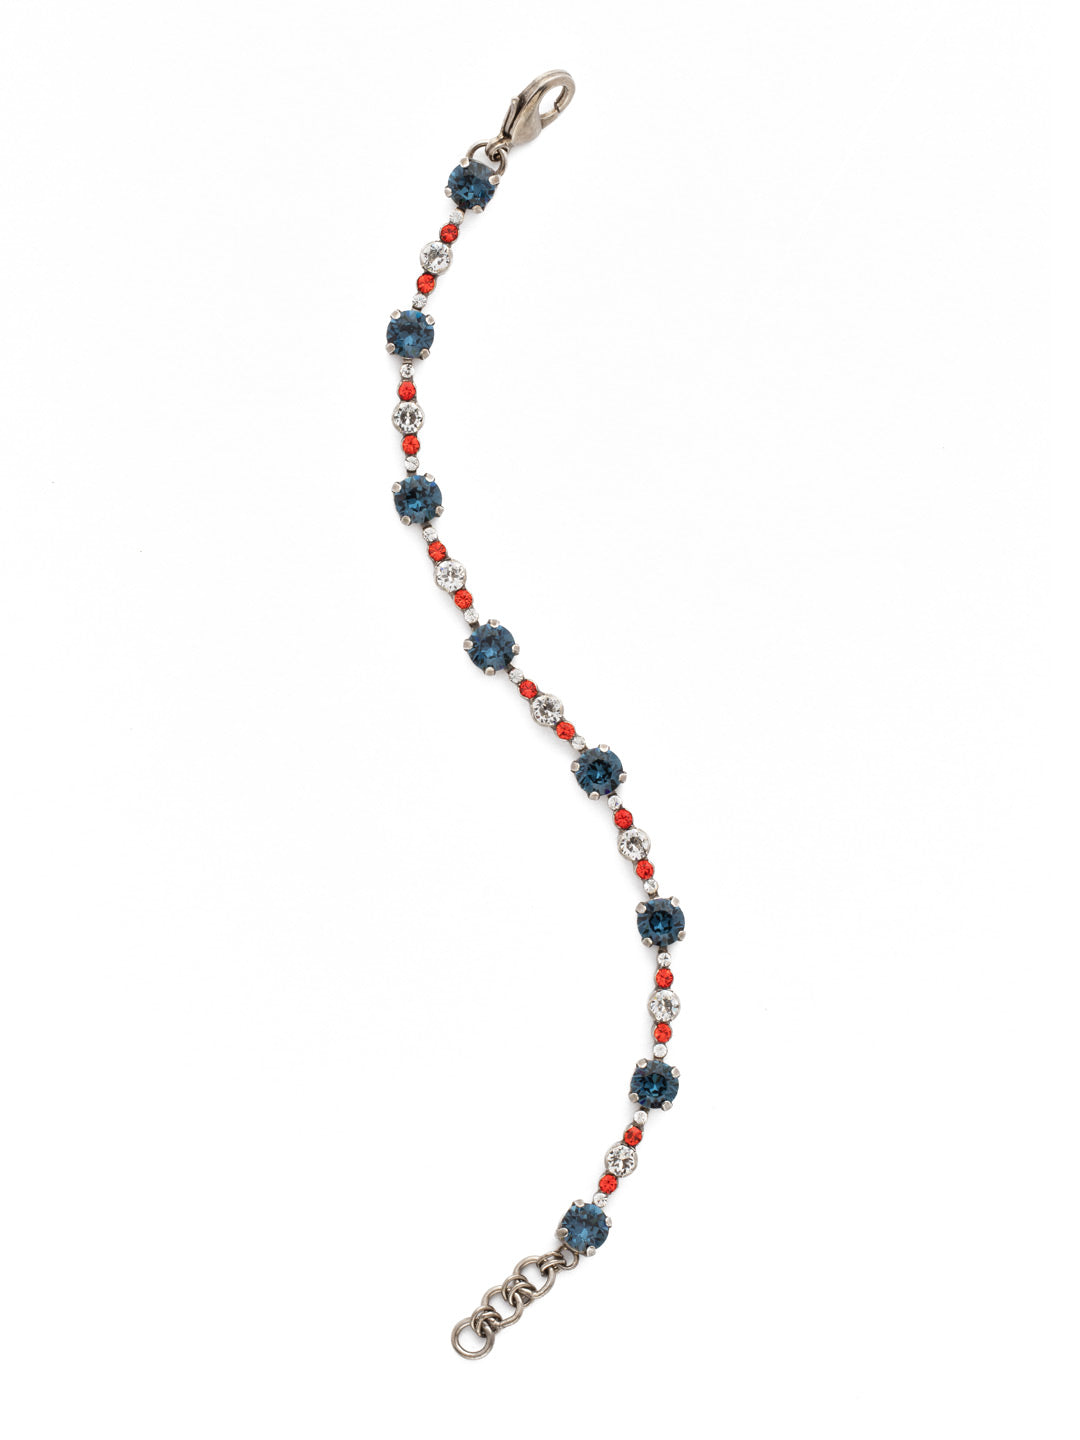 Connect the Dots Bracelet - BDN15ASBTB - <p>Eight large round cut crystals are connected by petite circular stones in this eye-catching style. Layer it with other line bracelets for personalized look. From Sorrelli's Battle Blue collection in our Antique Silver-tone finish.</p>